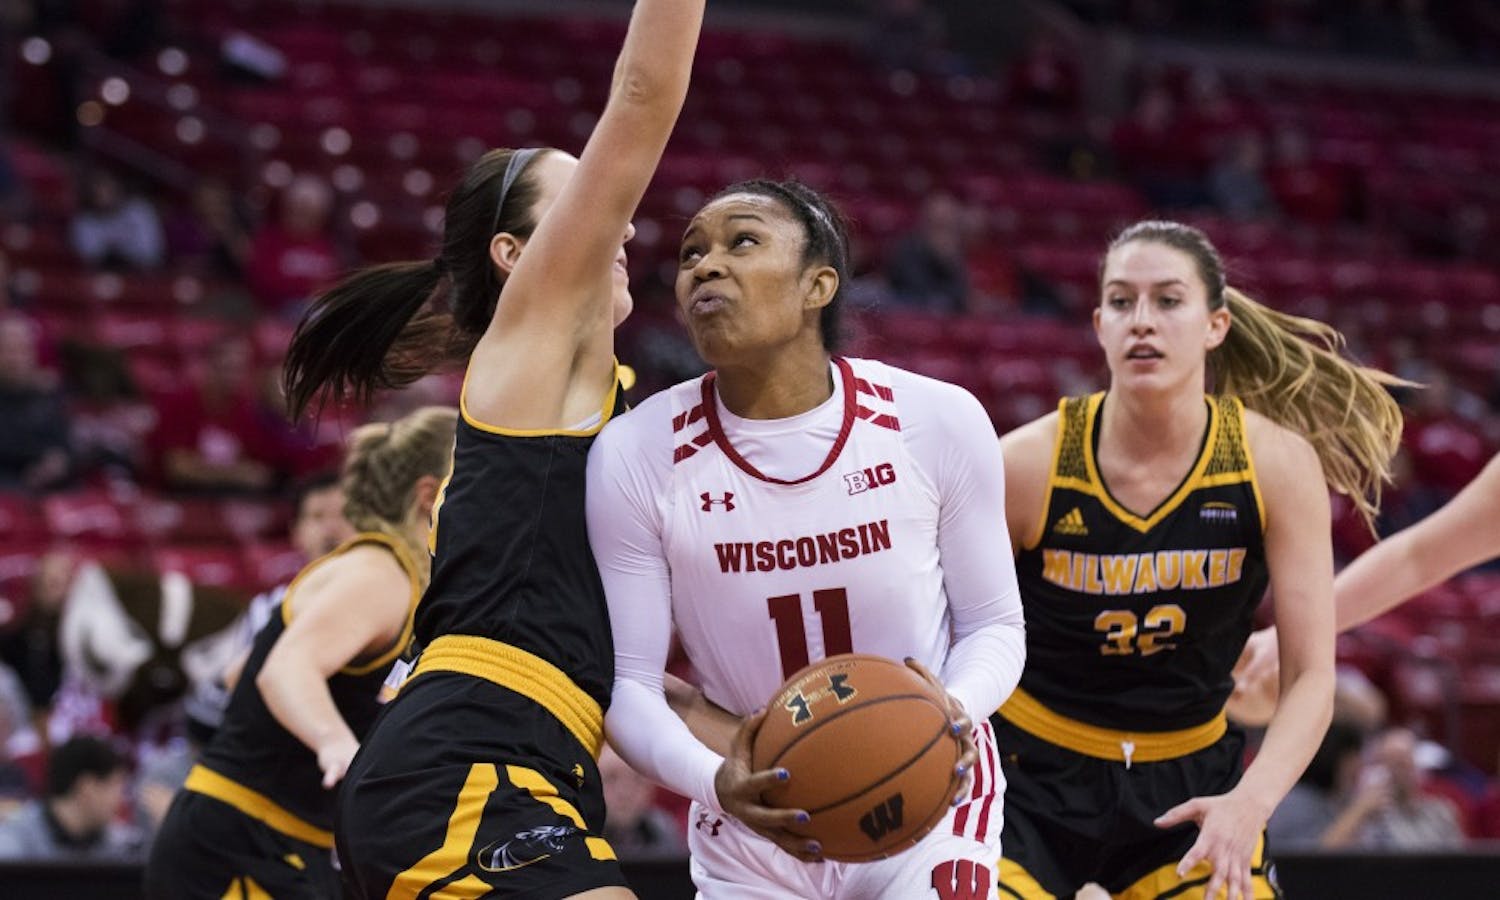 Senior forward Marsha Howard followed up her 1000th career point against Ohio State with a dominant game at home Wednesday night versus Illinois.